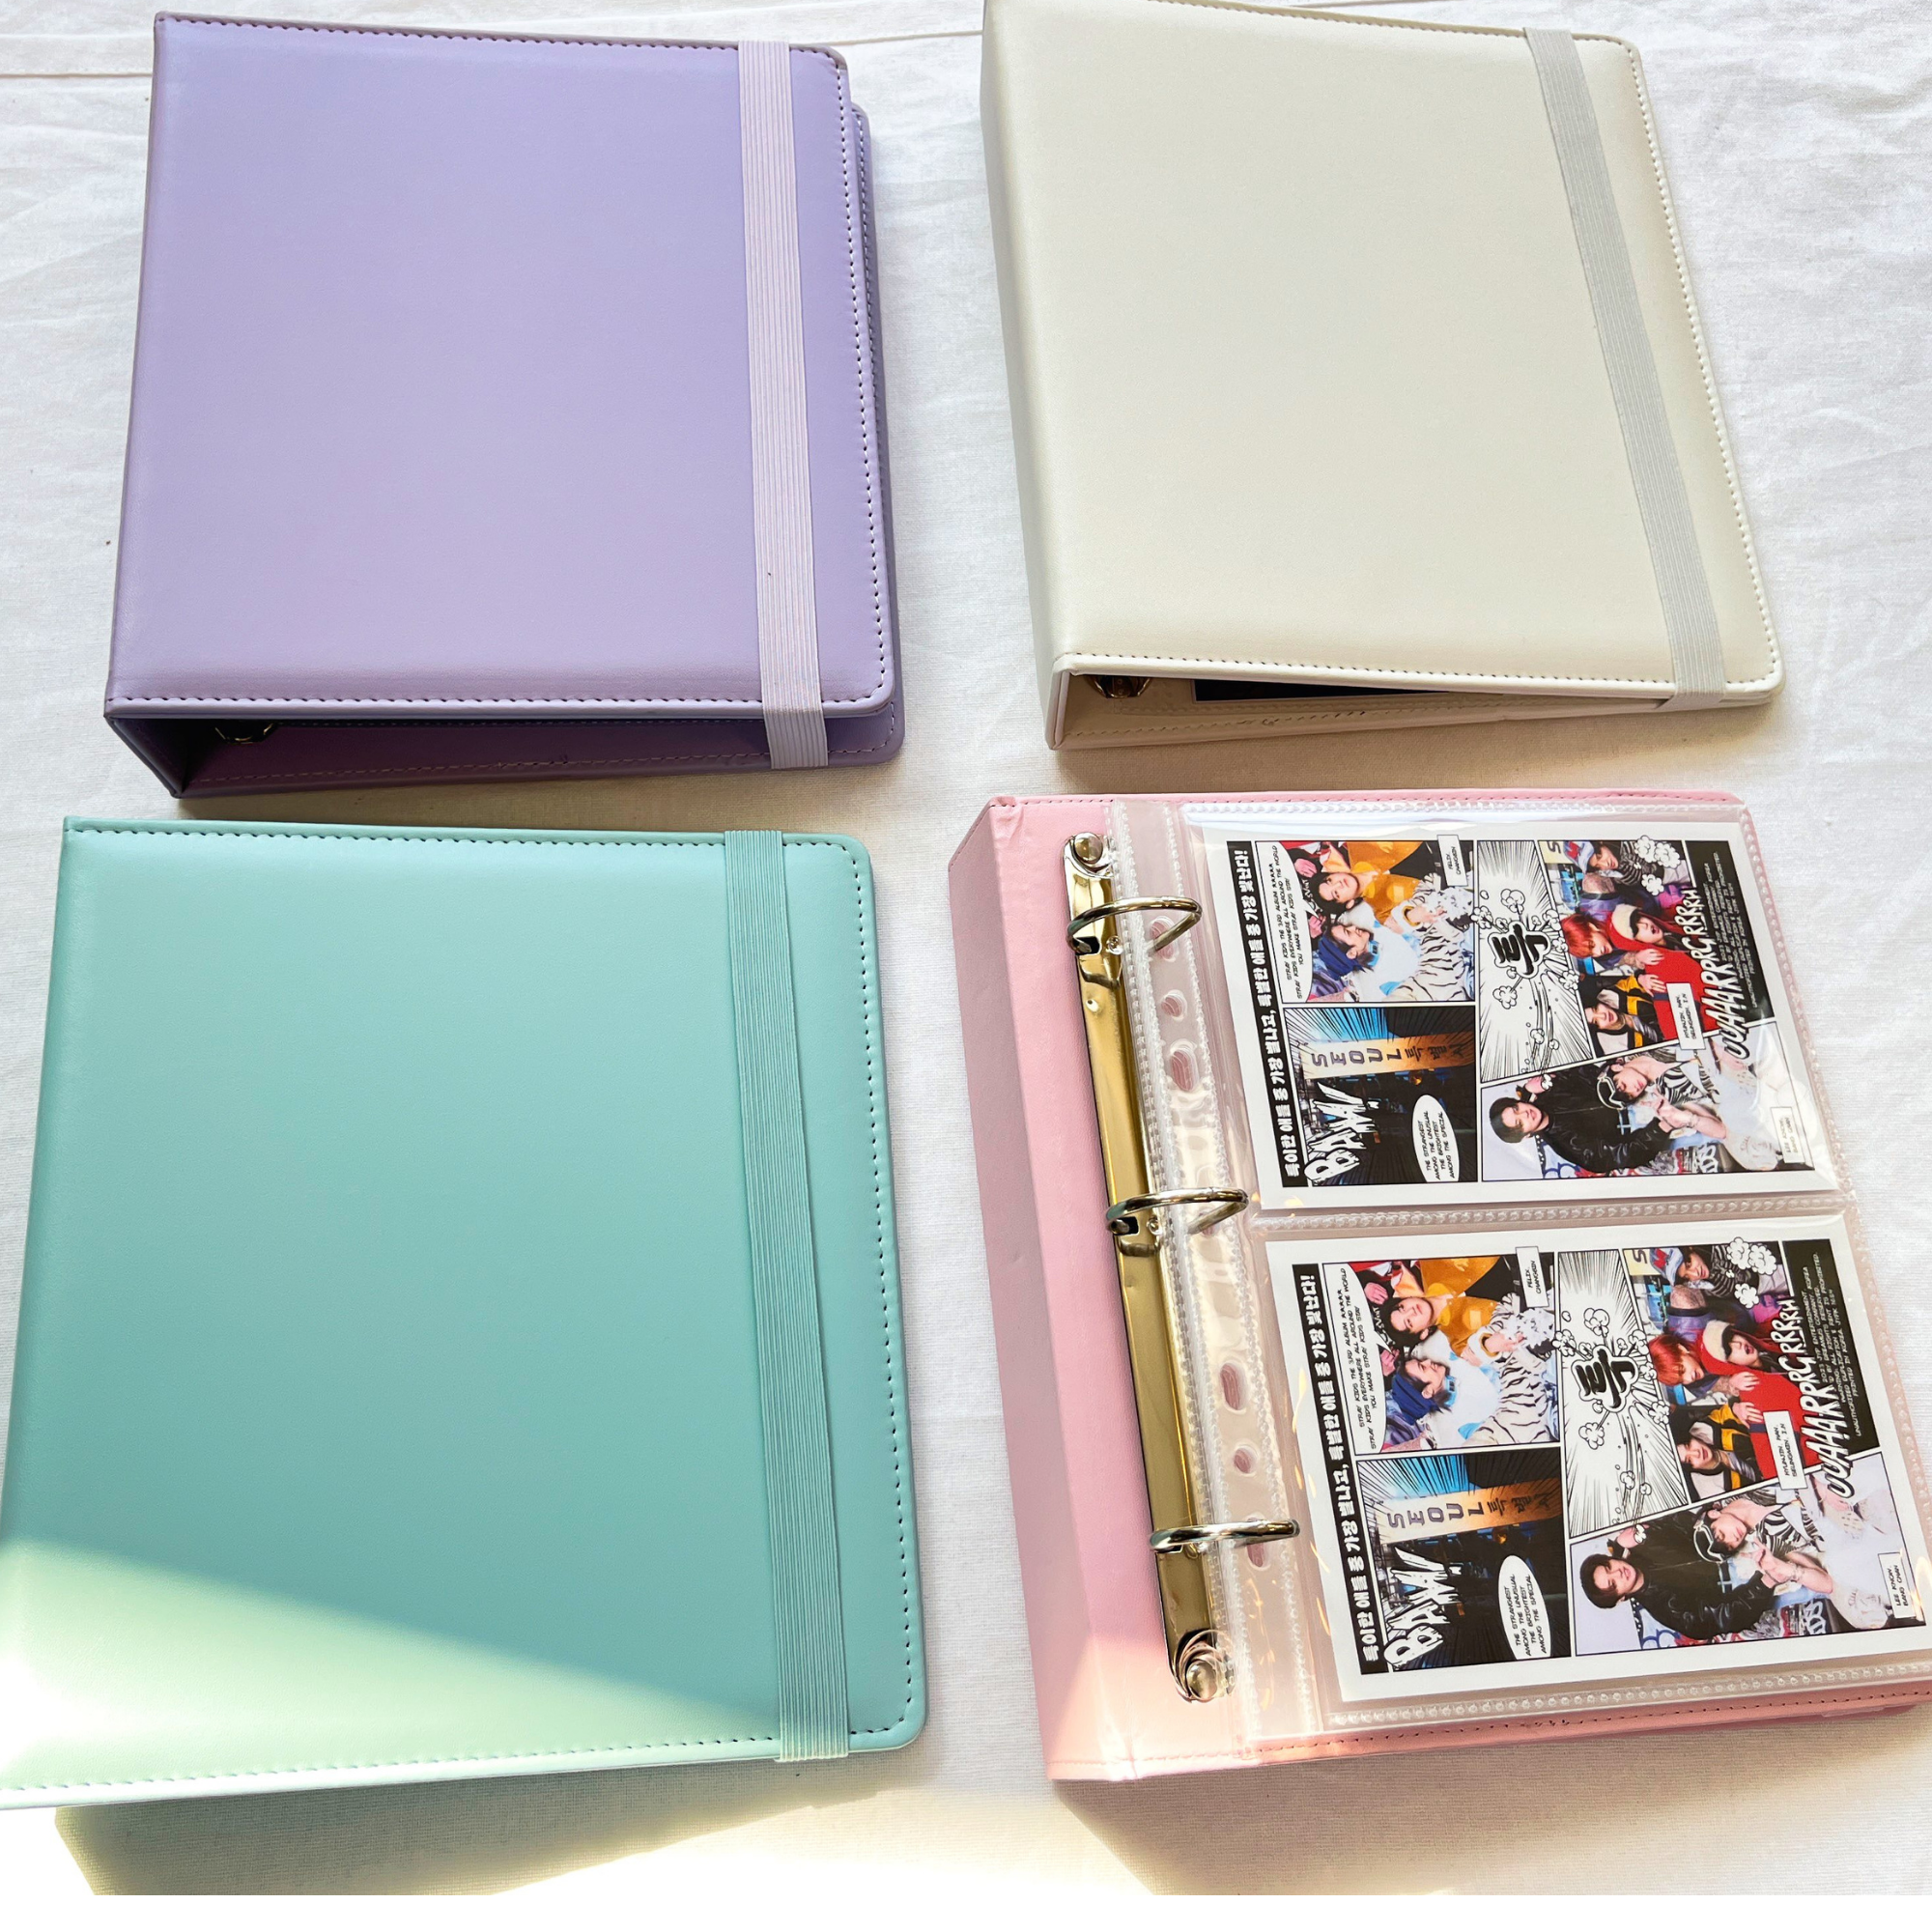 K-KEEP [A5 Wide] Binder [Pastel Series] "Tour" "Postcard" Binder | 1 inch  Pastel Leather Collection Kpop Photocard Binder 4x6 Postcard Toploader  6 x 8 inch Stray Kids Mini Poster